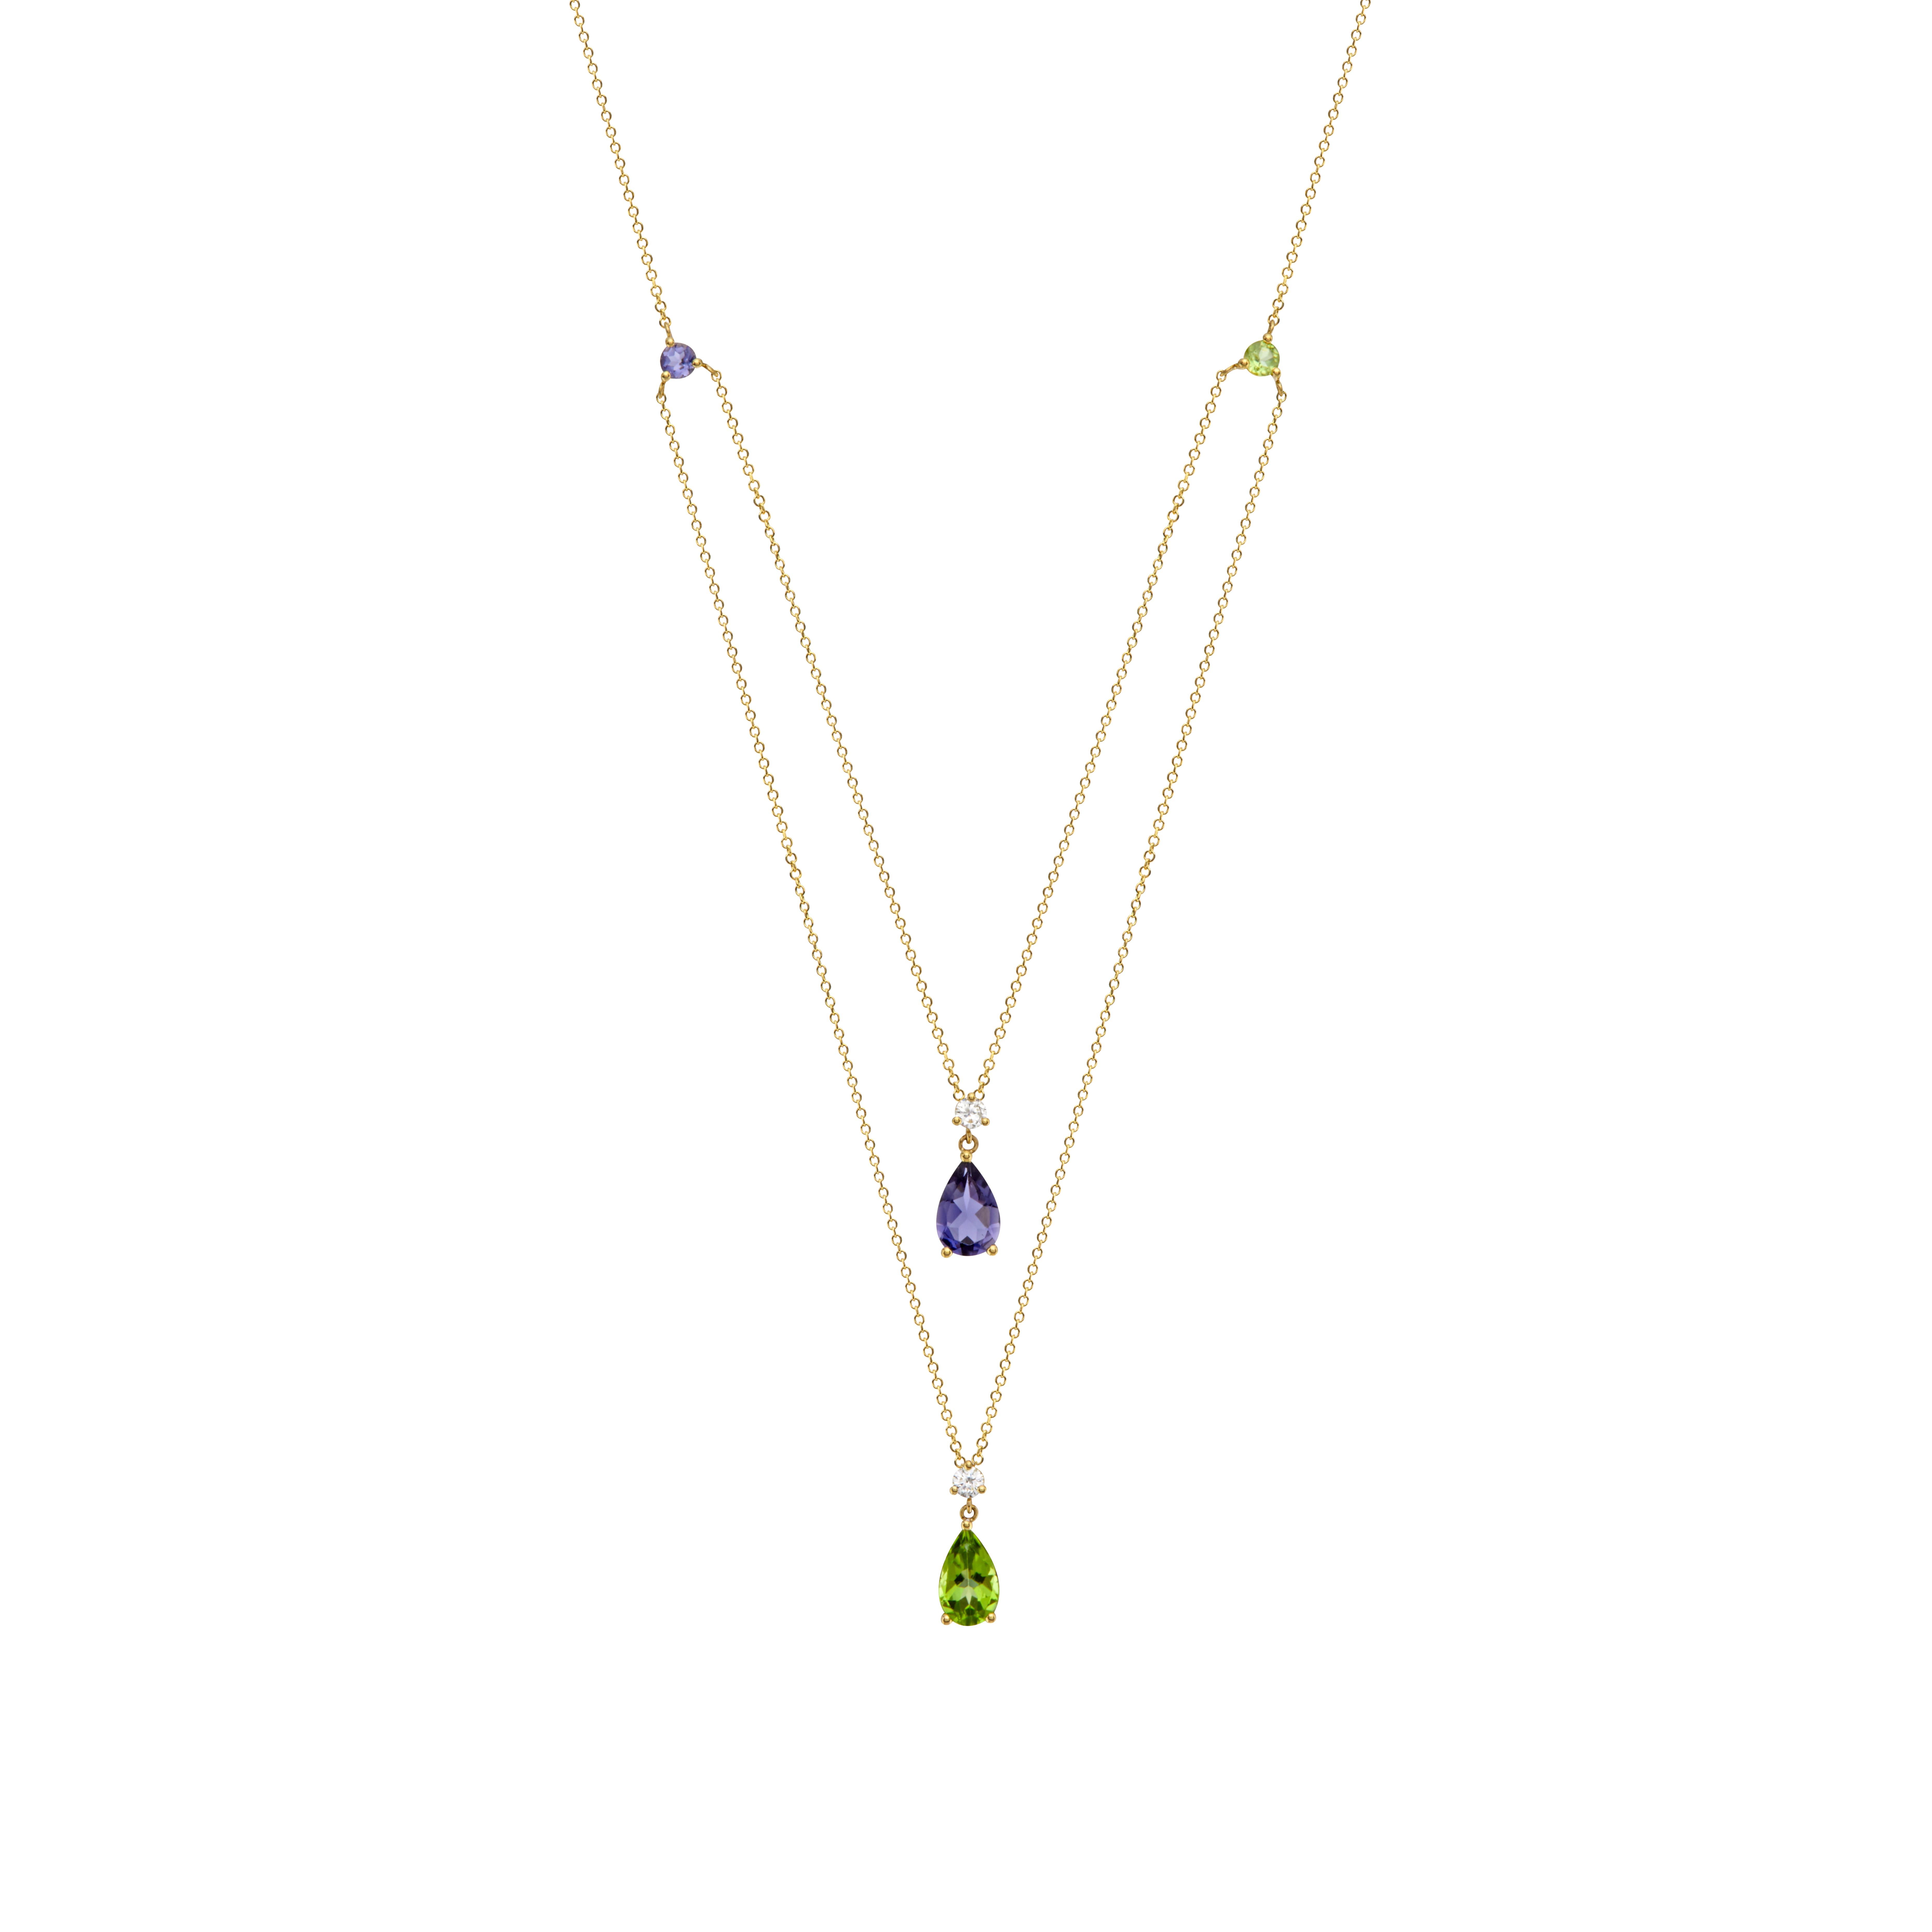 Double Pendant Necklace in 18Kt Yellow Gold with Peridot Iolite and Diamonds For Sale